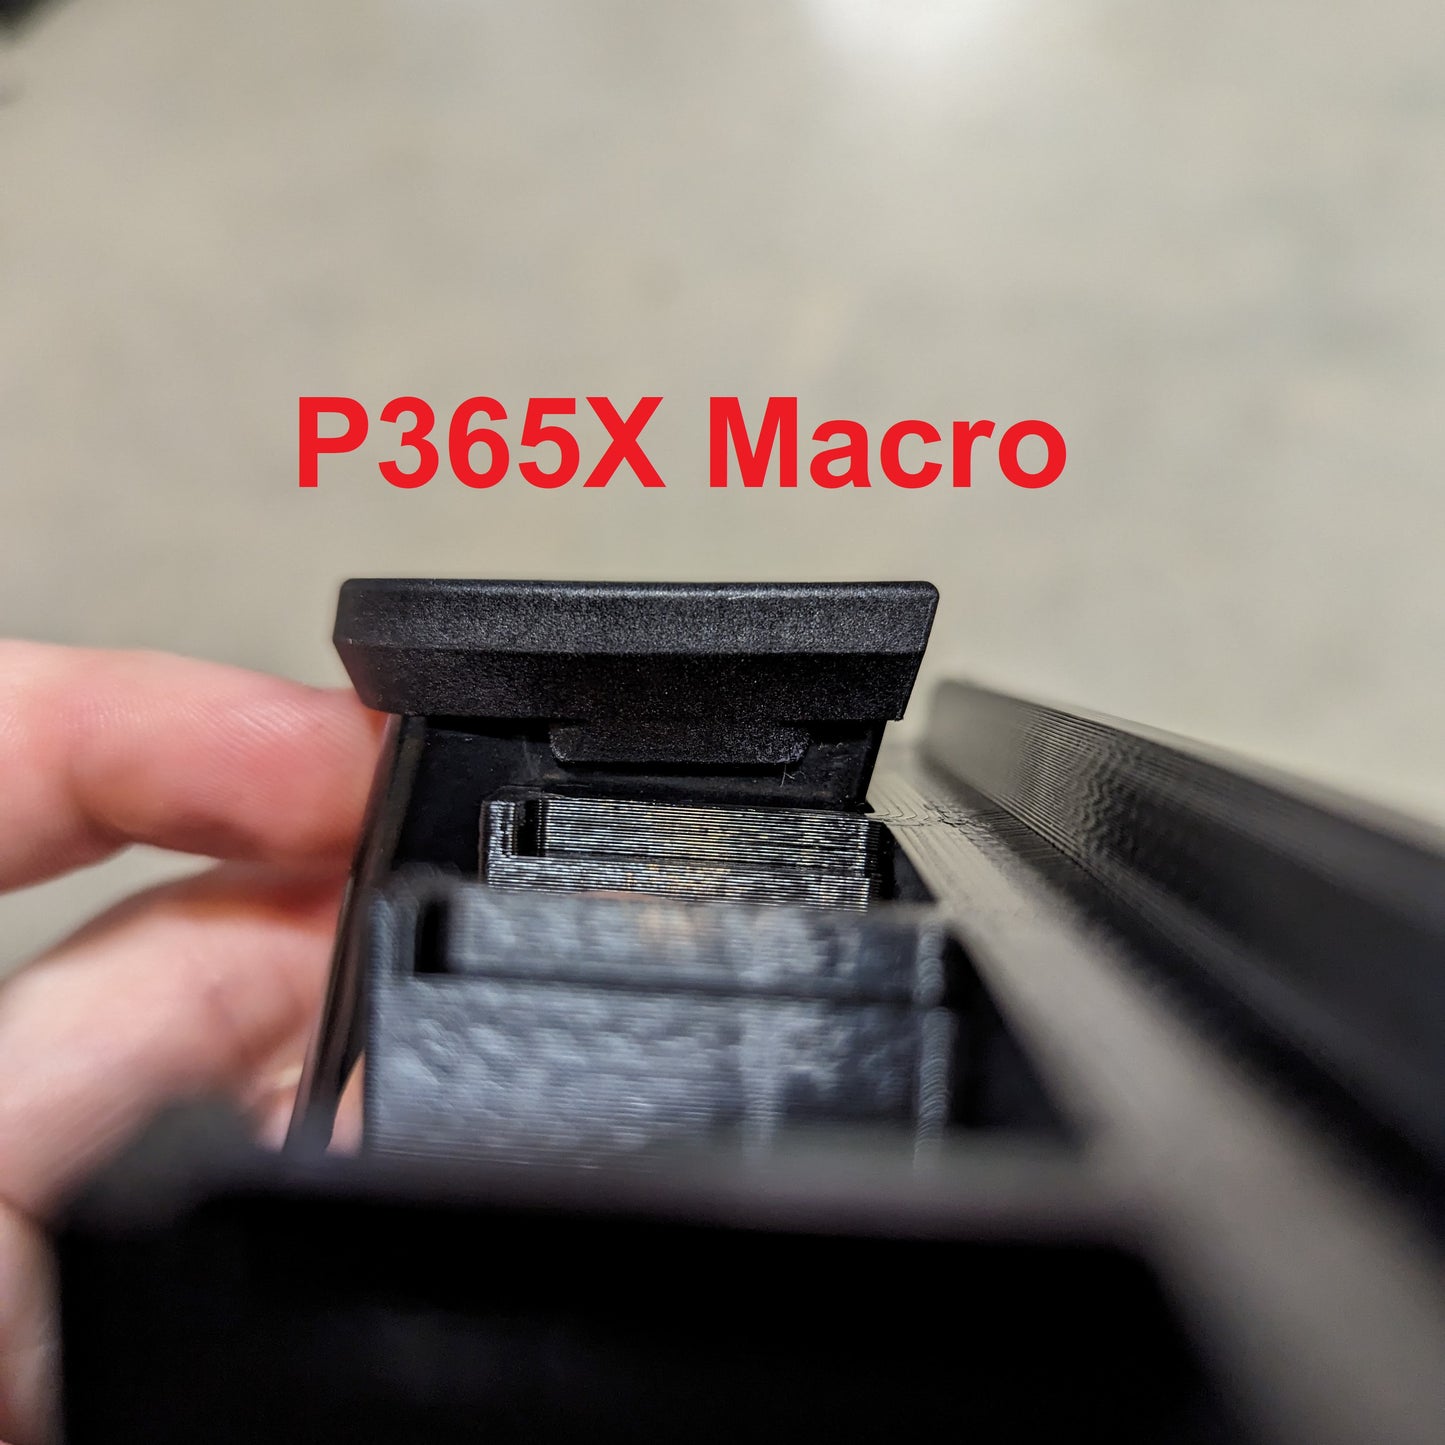 Mount for Sig P365 / XMacro Mags - Gridwall | Magazine Holder Storage Rack